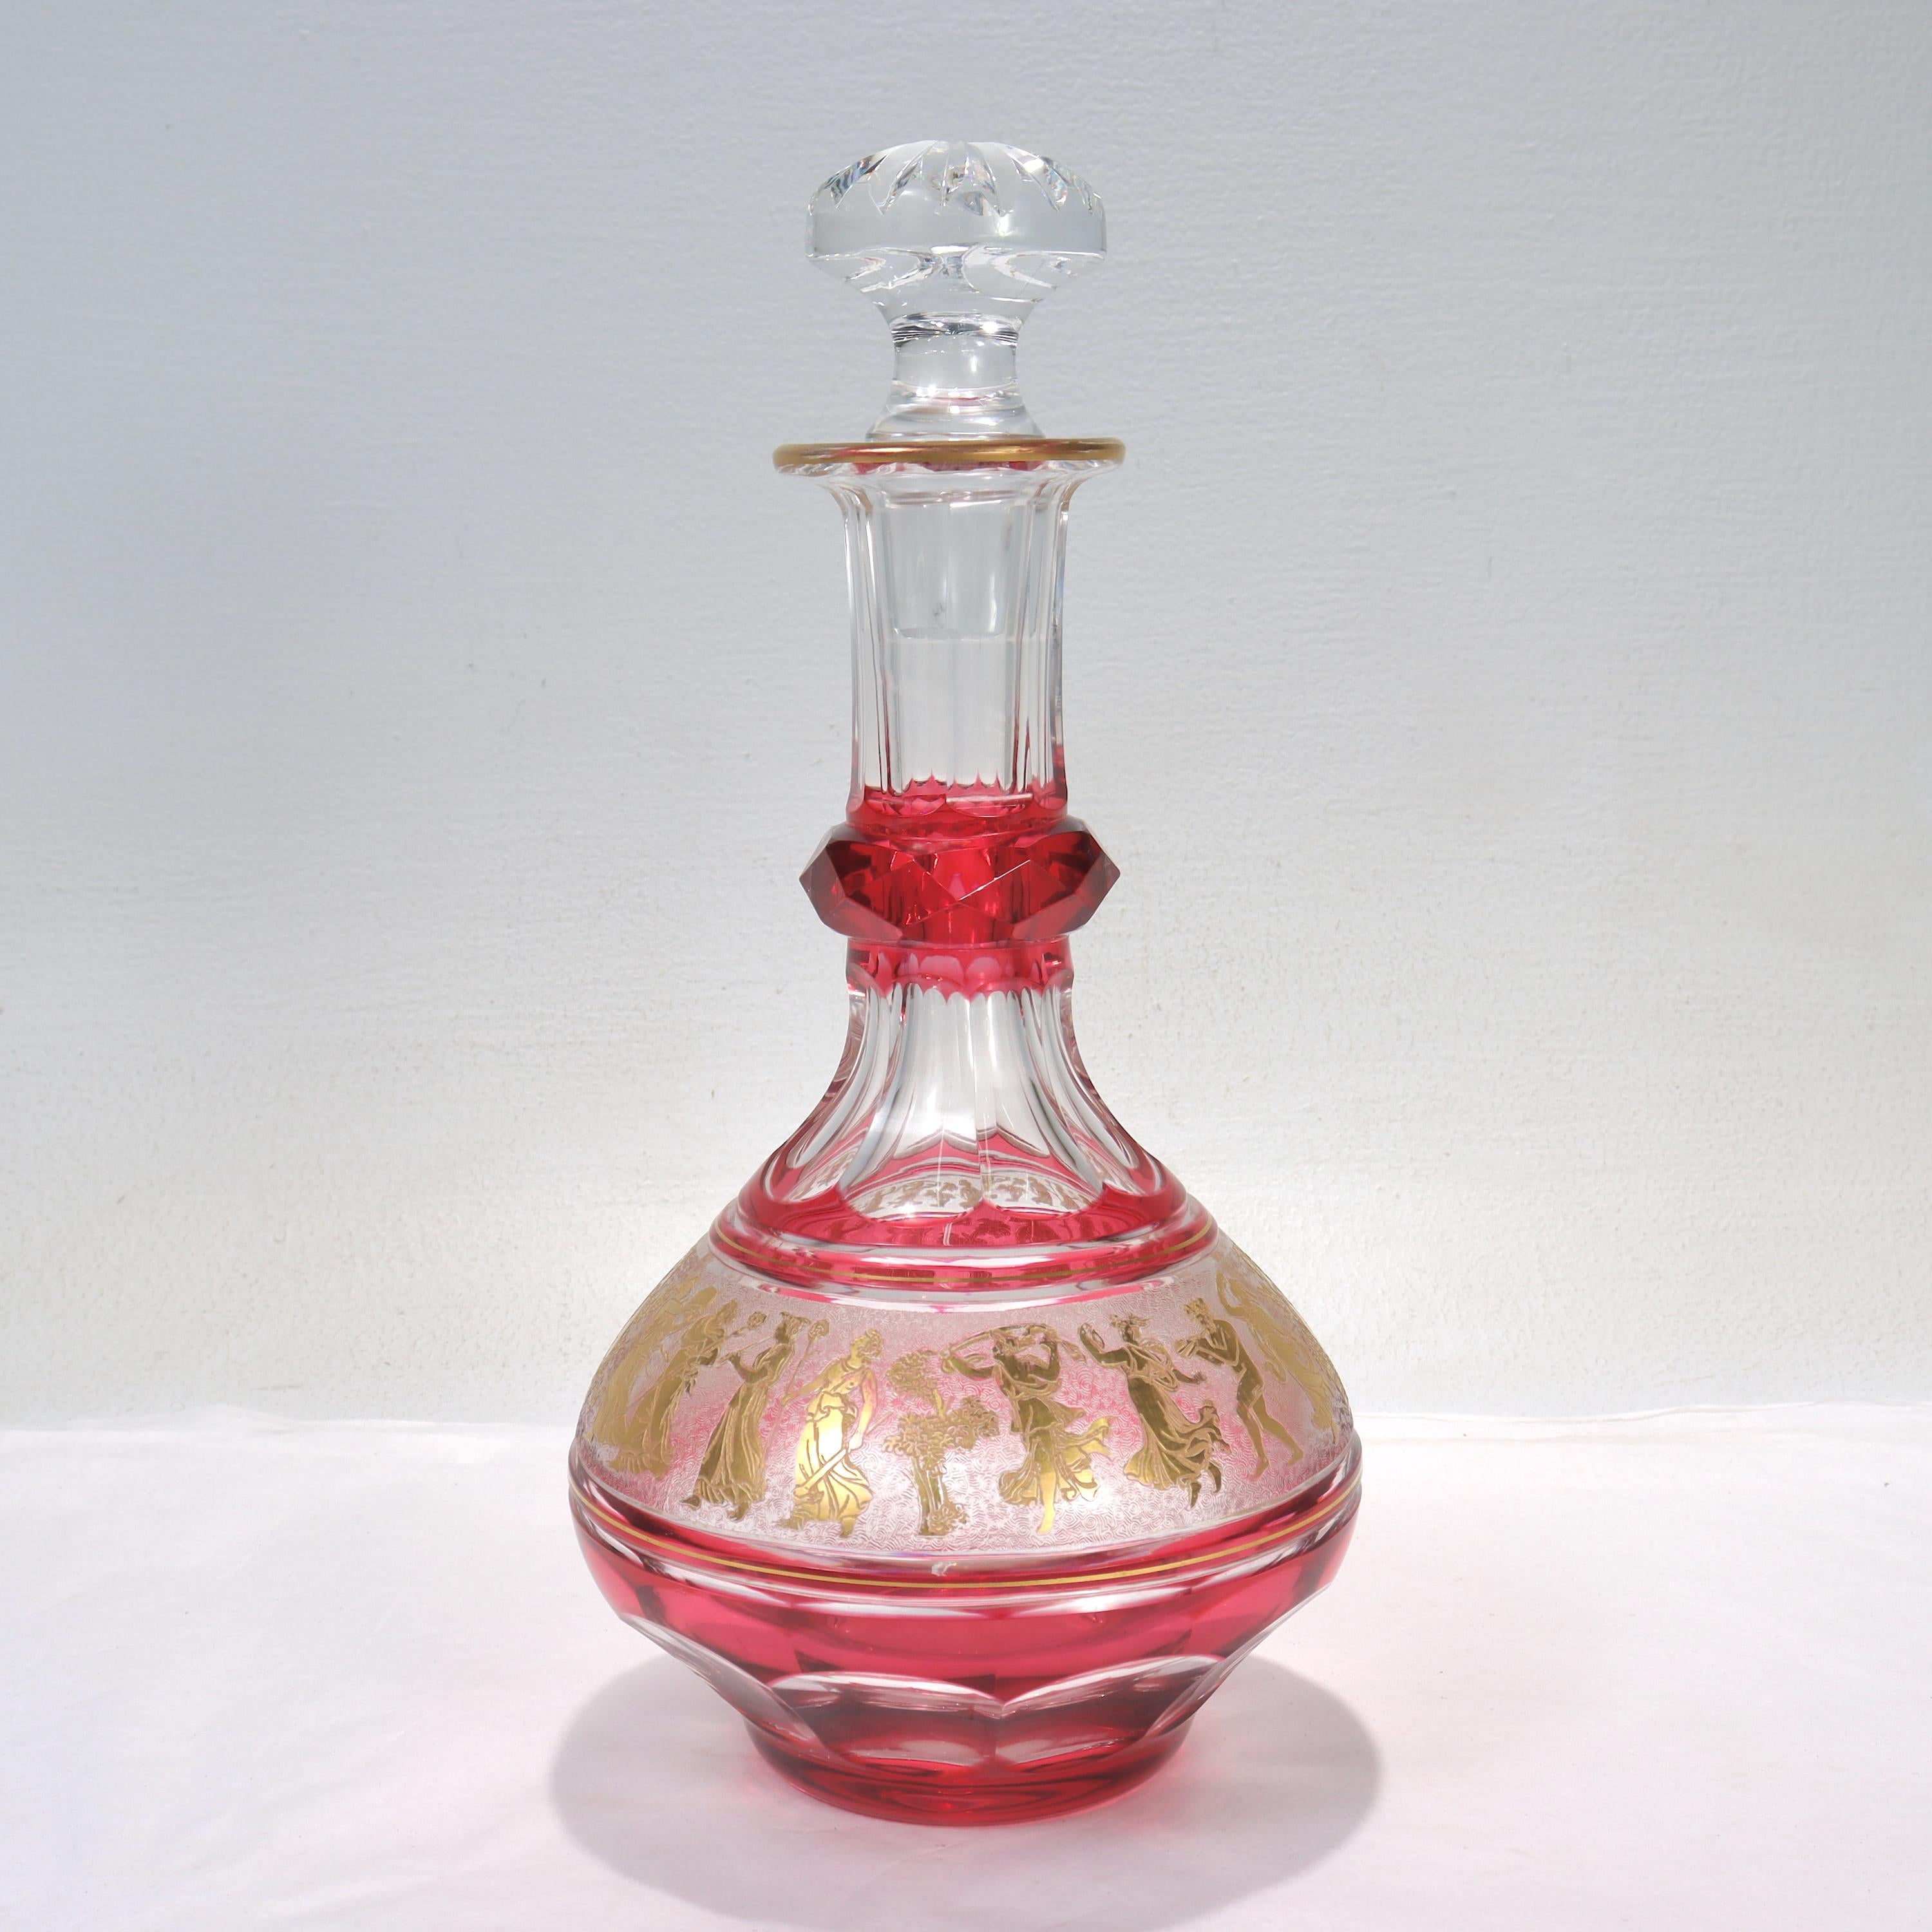 A very fine cranberry cut-to-clear glass or crystal wine decanter.

By Val St. Lambert.

In the Danse de Flore pattern. 

Encased in cranberry cut to clear glass with a gilt, acid-etched frieze of Bacchanalian dancers along the circumference.